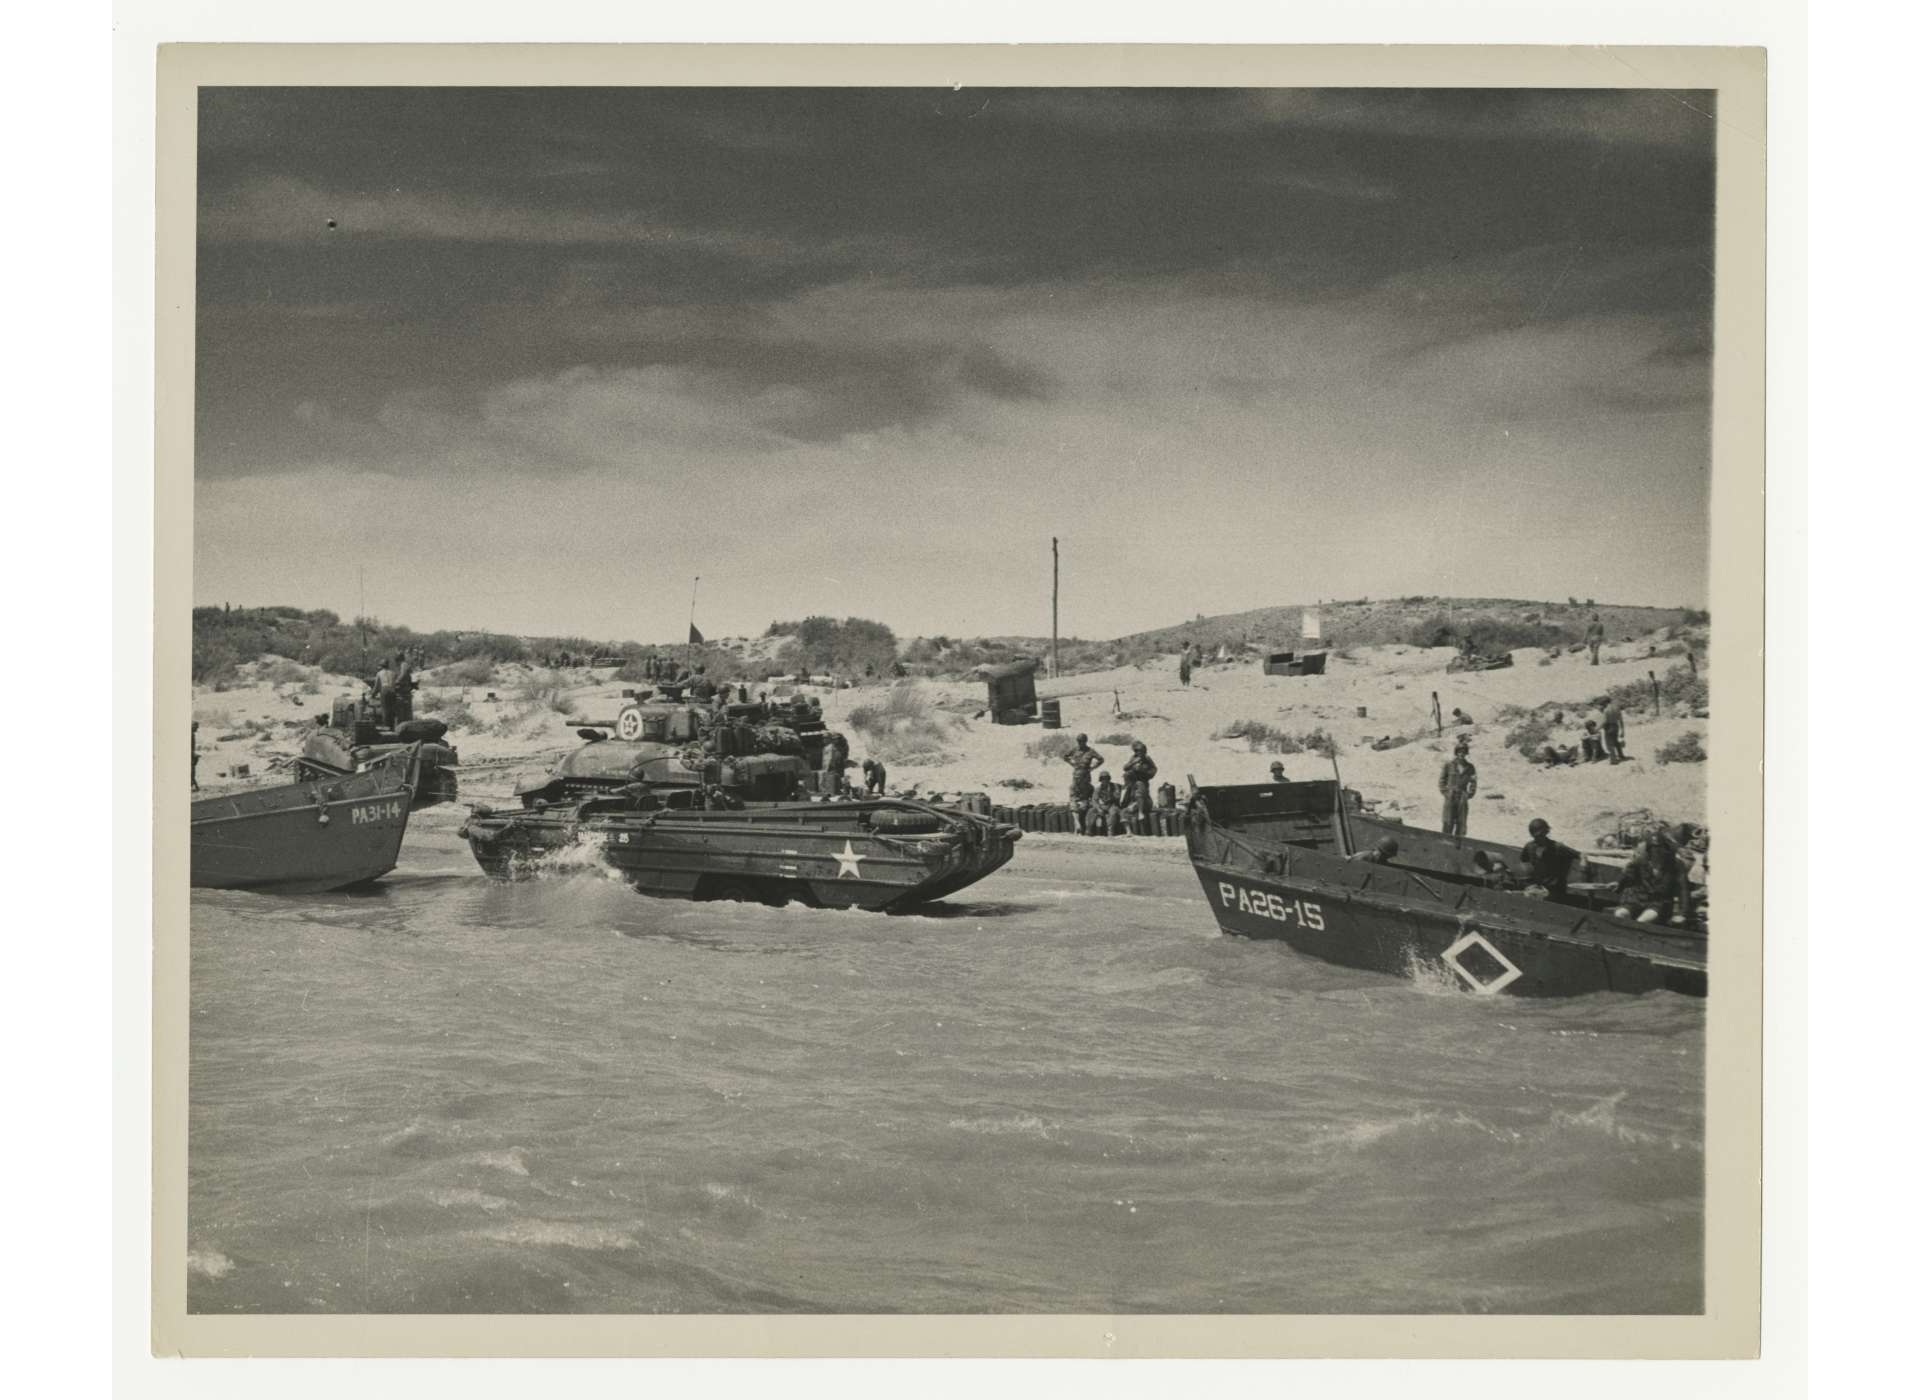 US LCVPs (Landing Craft Vehicle, Personnel), also known as “Higgins boats,” from USS Samuel Chase and USS Monrovia, an amphibious truck and a Sherman tank on Sicily, July 1943. Official US Coast Guard Photo, gift of Jeffrey and Mary Cole, from the Collection of The National WWII Museum, 2002.119.023.